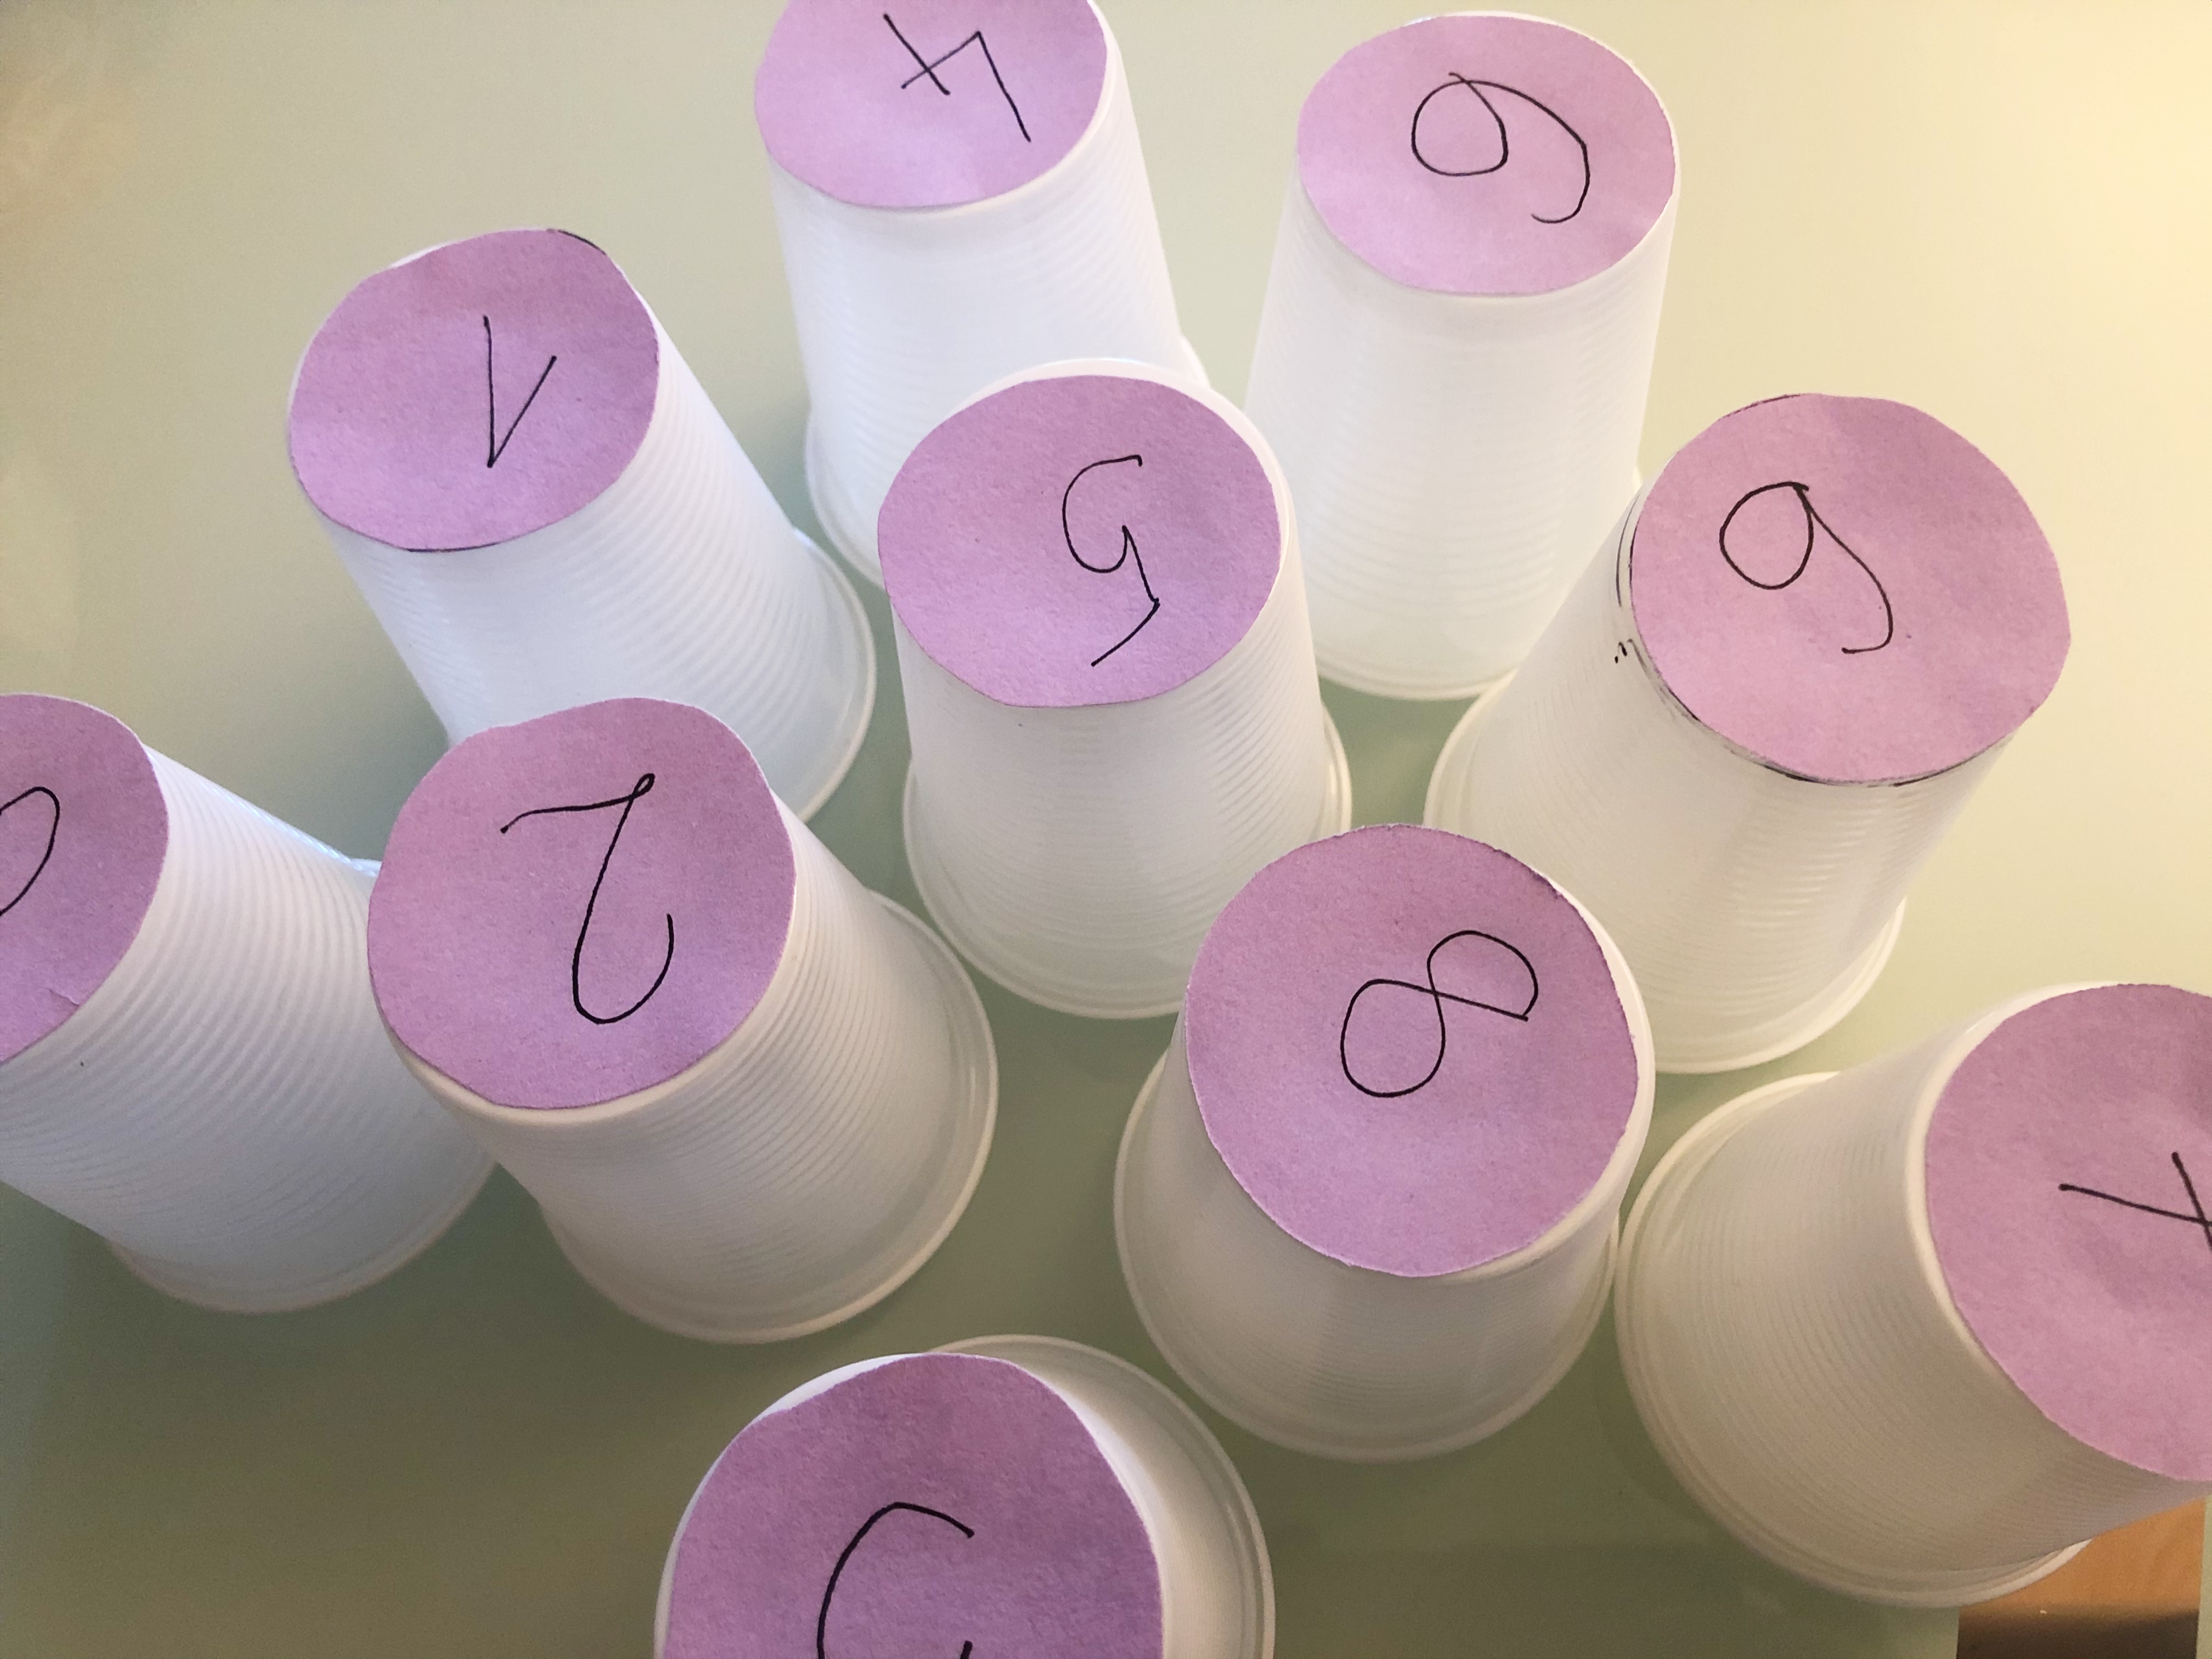 plastic drinking cups with numbbers